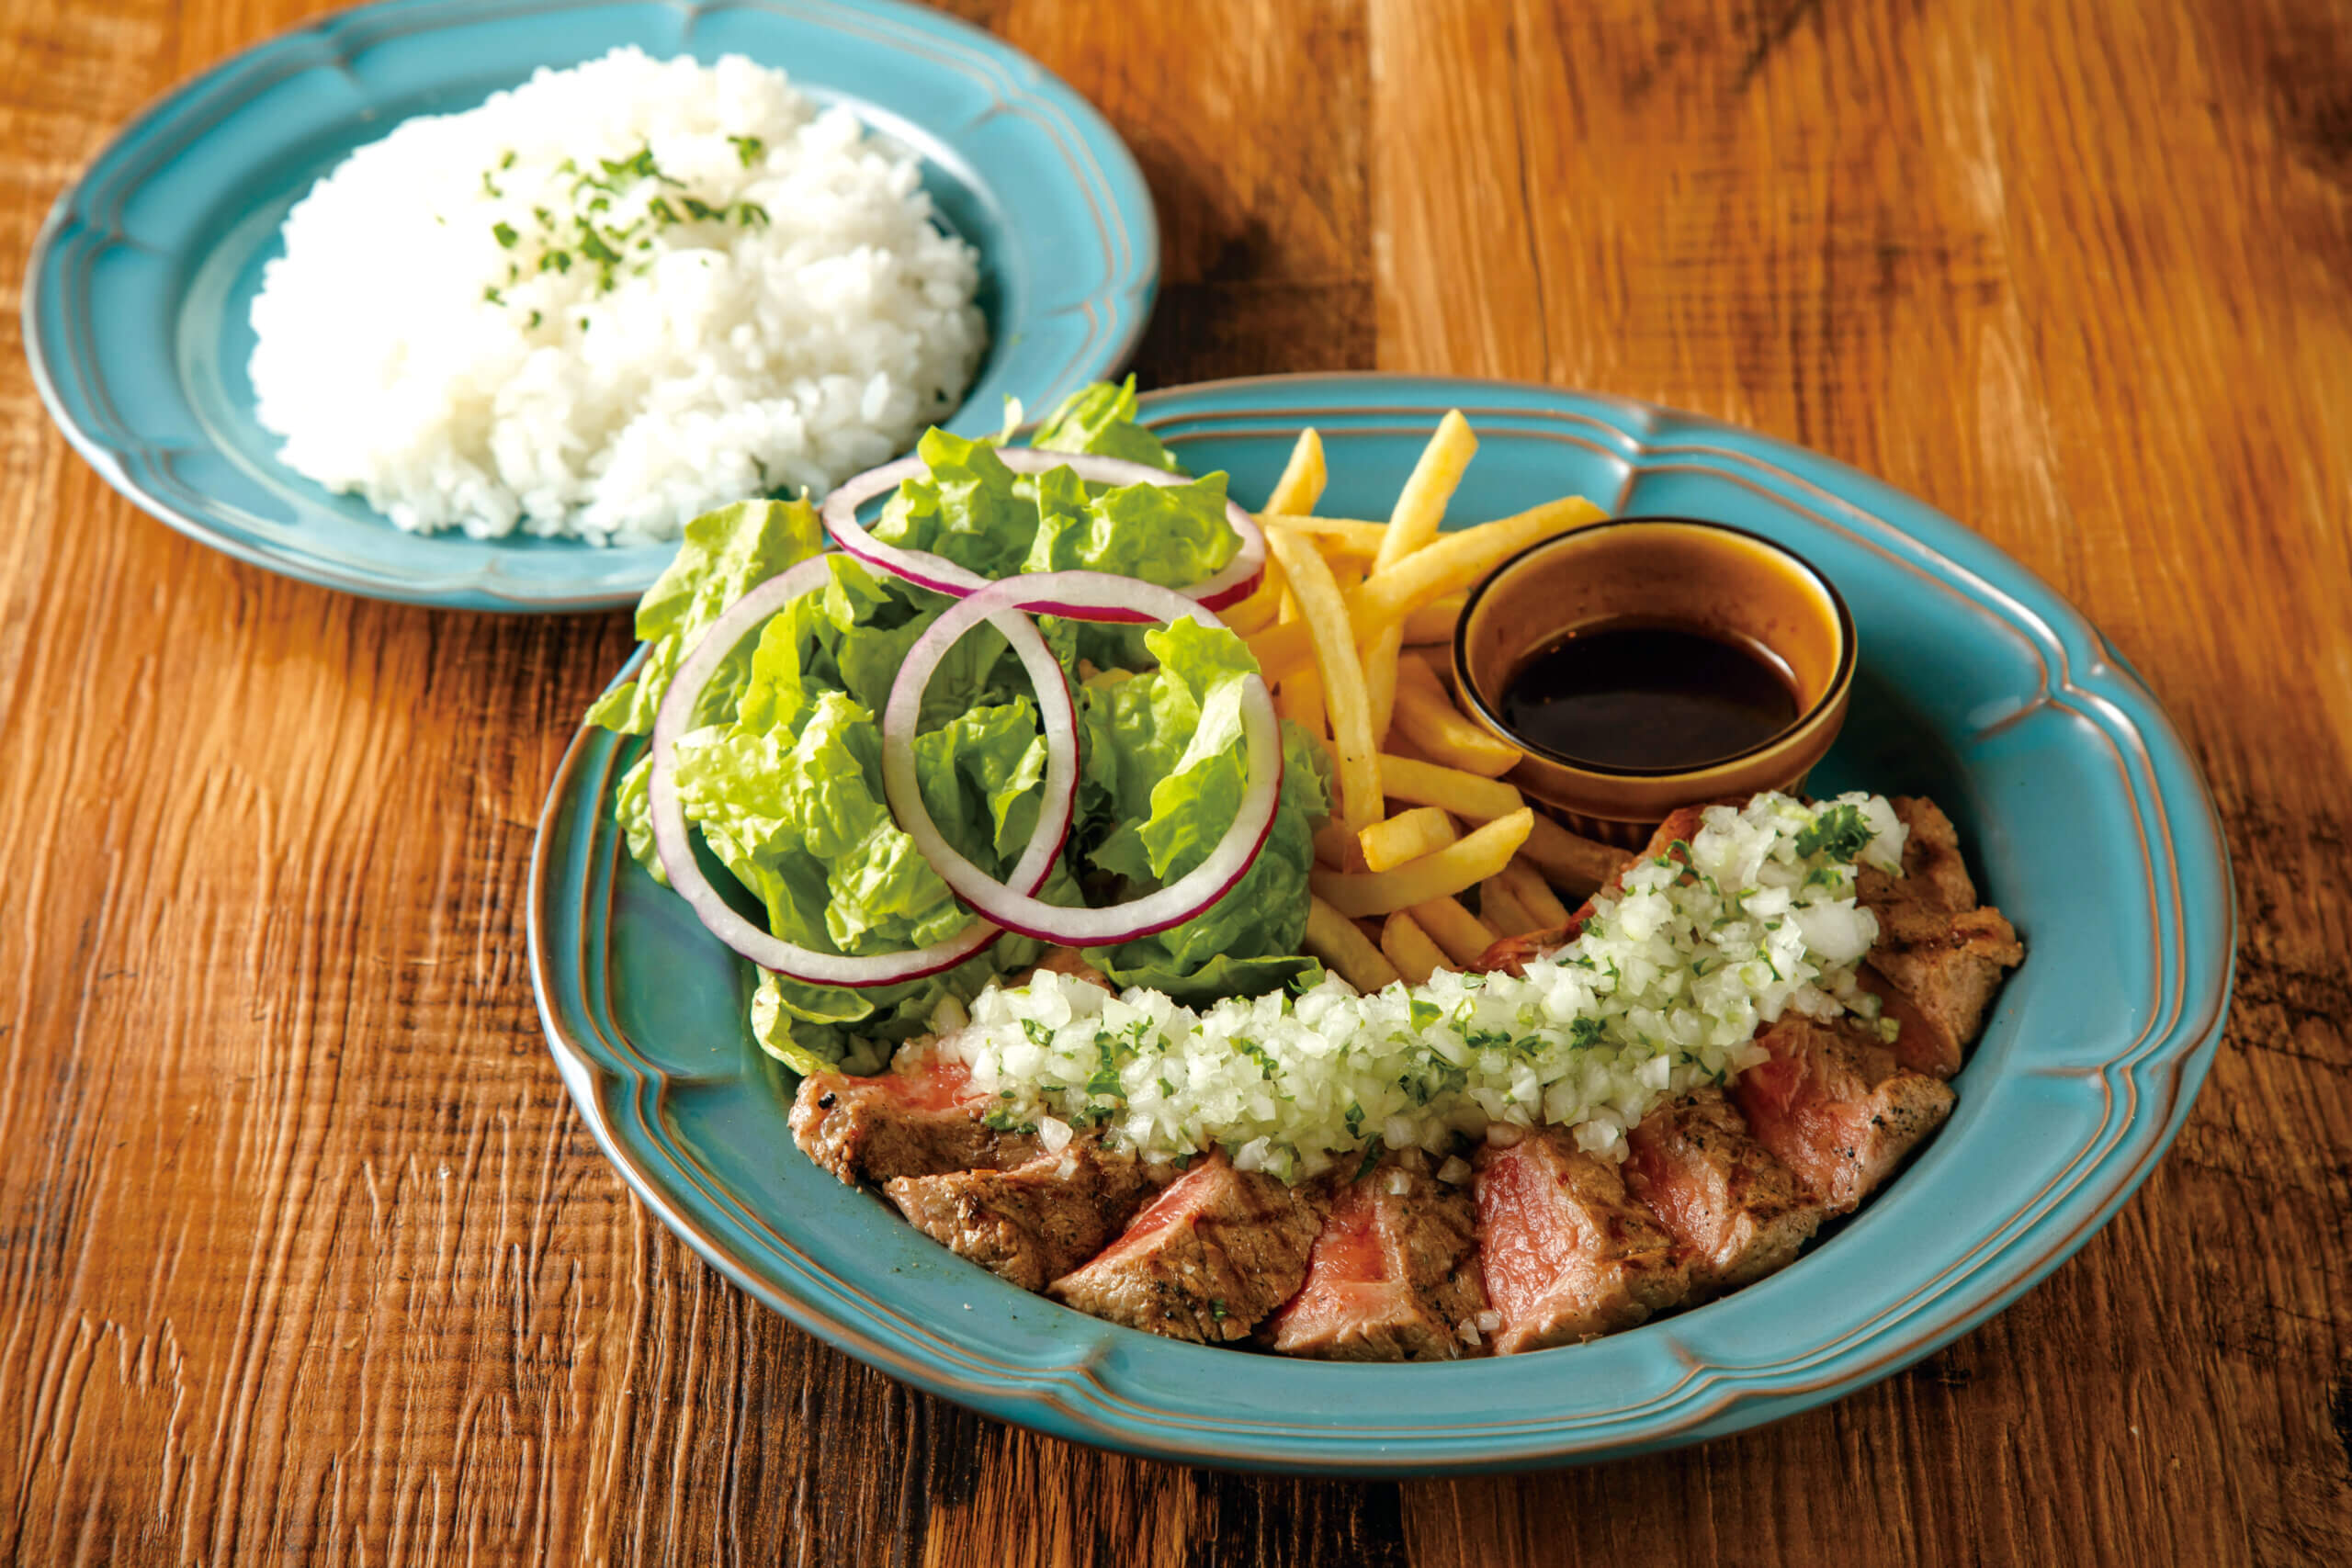 Choice beef sirloin steak lunch(In the case of take-out, we will provide it well-done.)